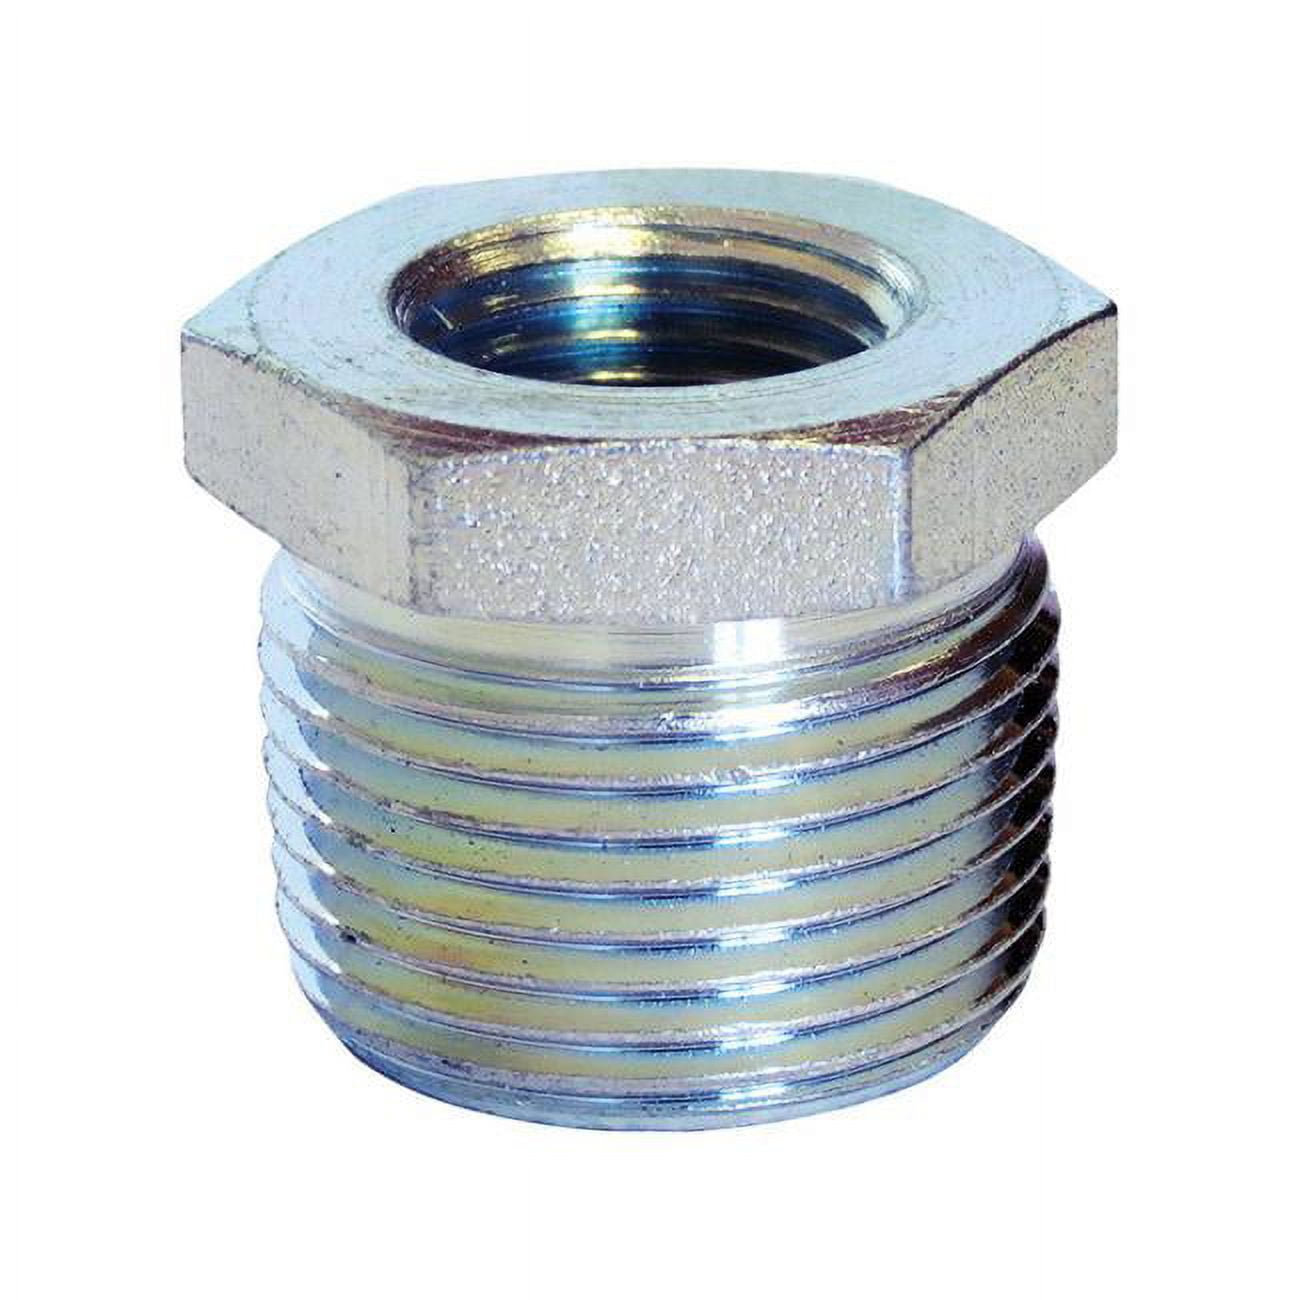 Picture of Anvil 4806923 0.75 in. MPT x 0.25 in. Dia. Schedule 40 FPT Galvanized Hex Bushing